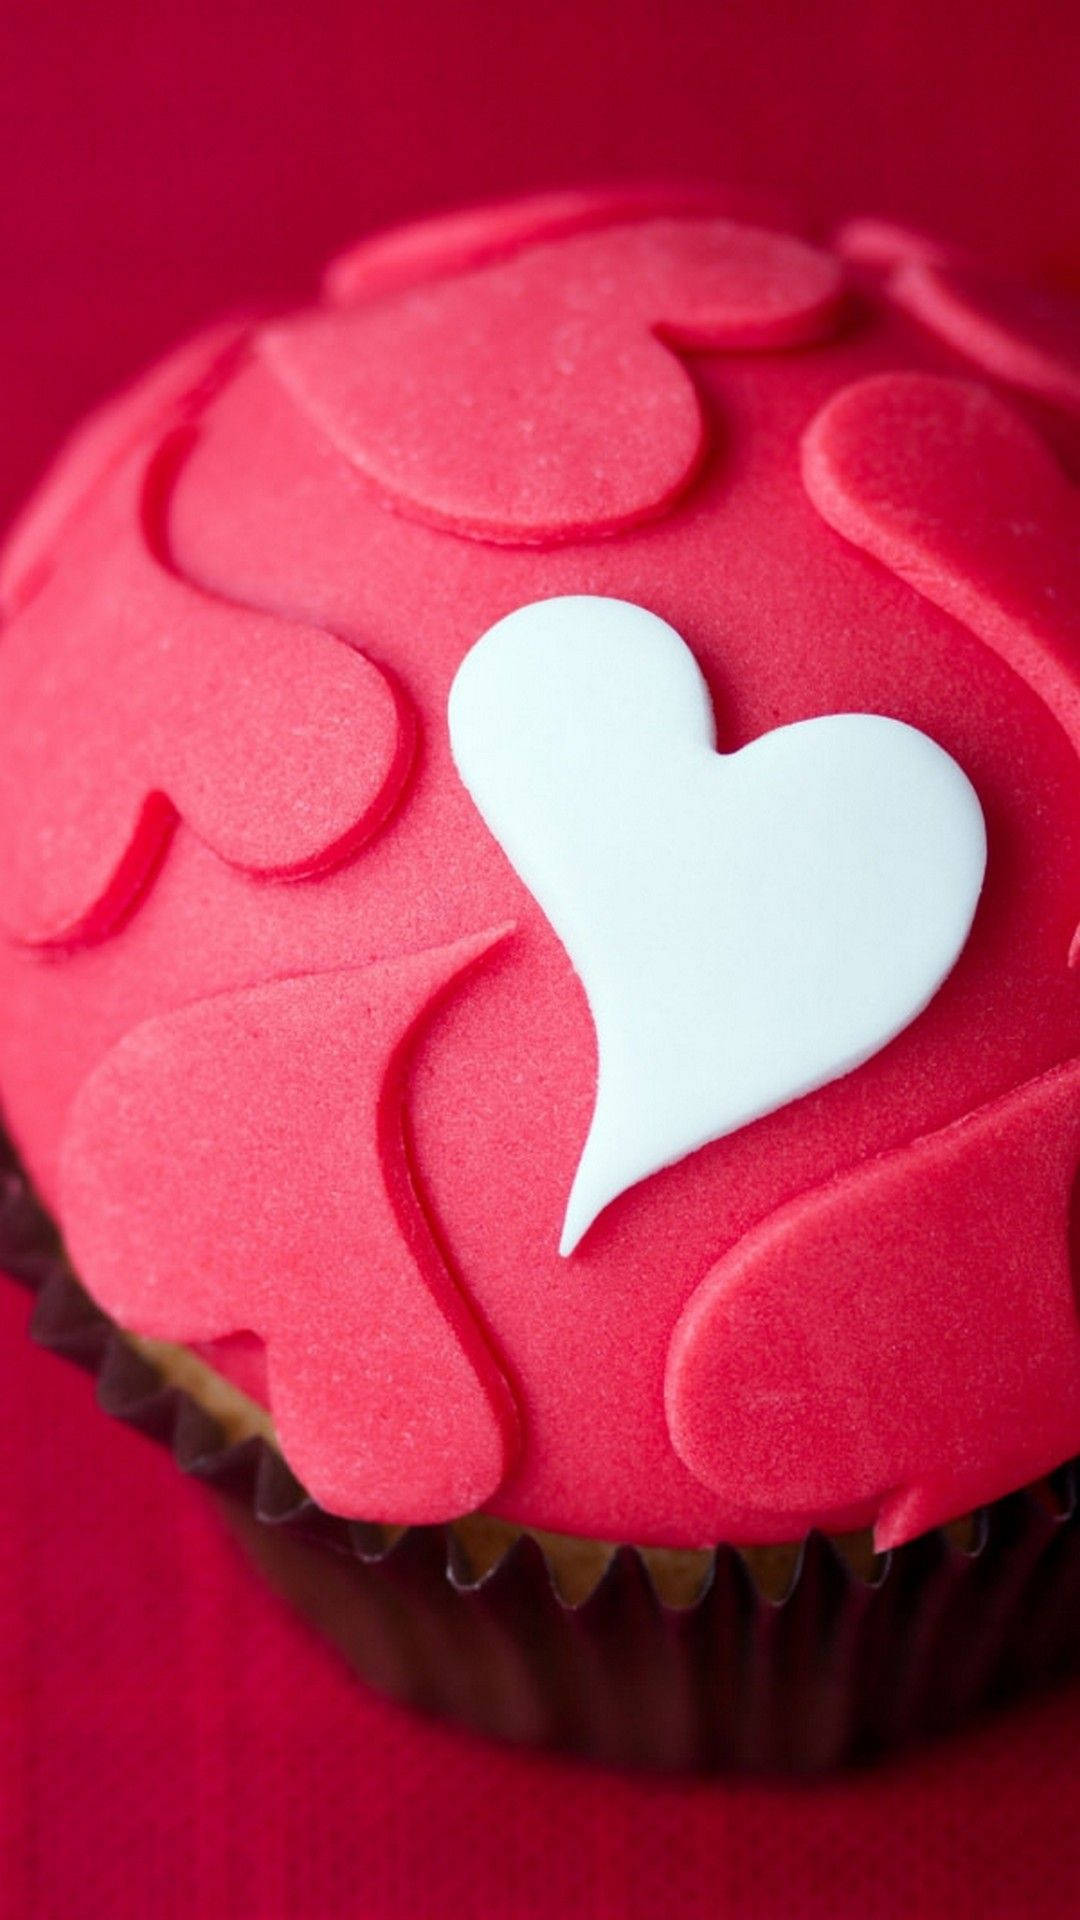 Download Valentine Cupcakes Cute Android Wallpaper